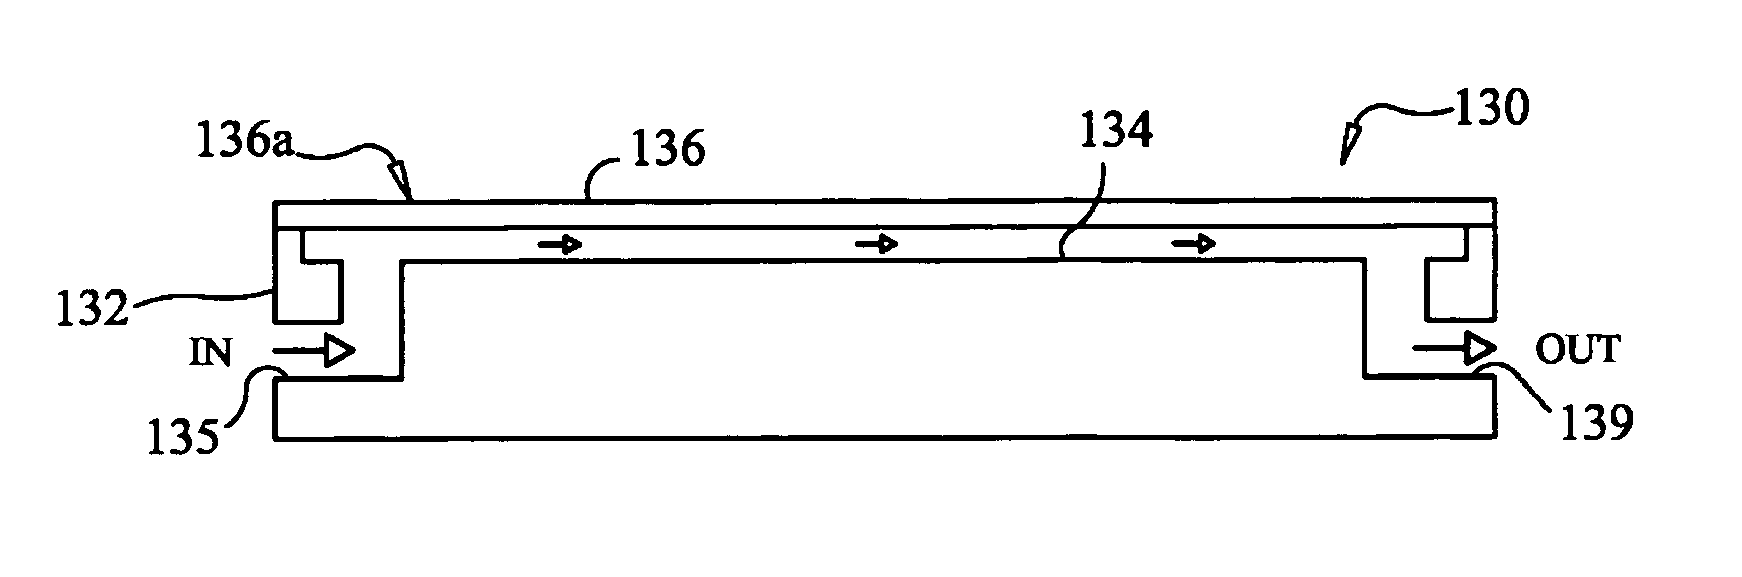 Water transport method and assembly including a thin film membrane for the addition or removal of water from gases or liquids